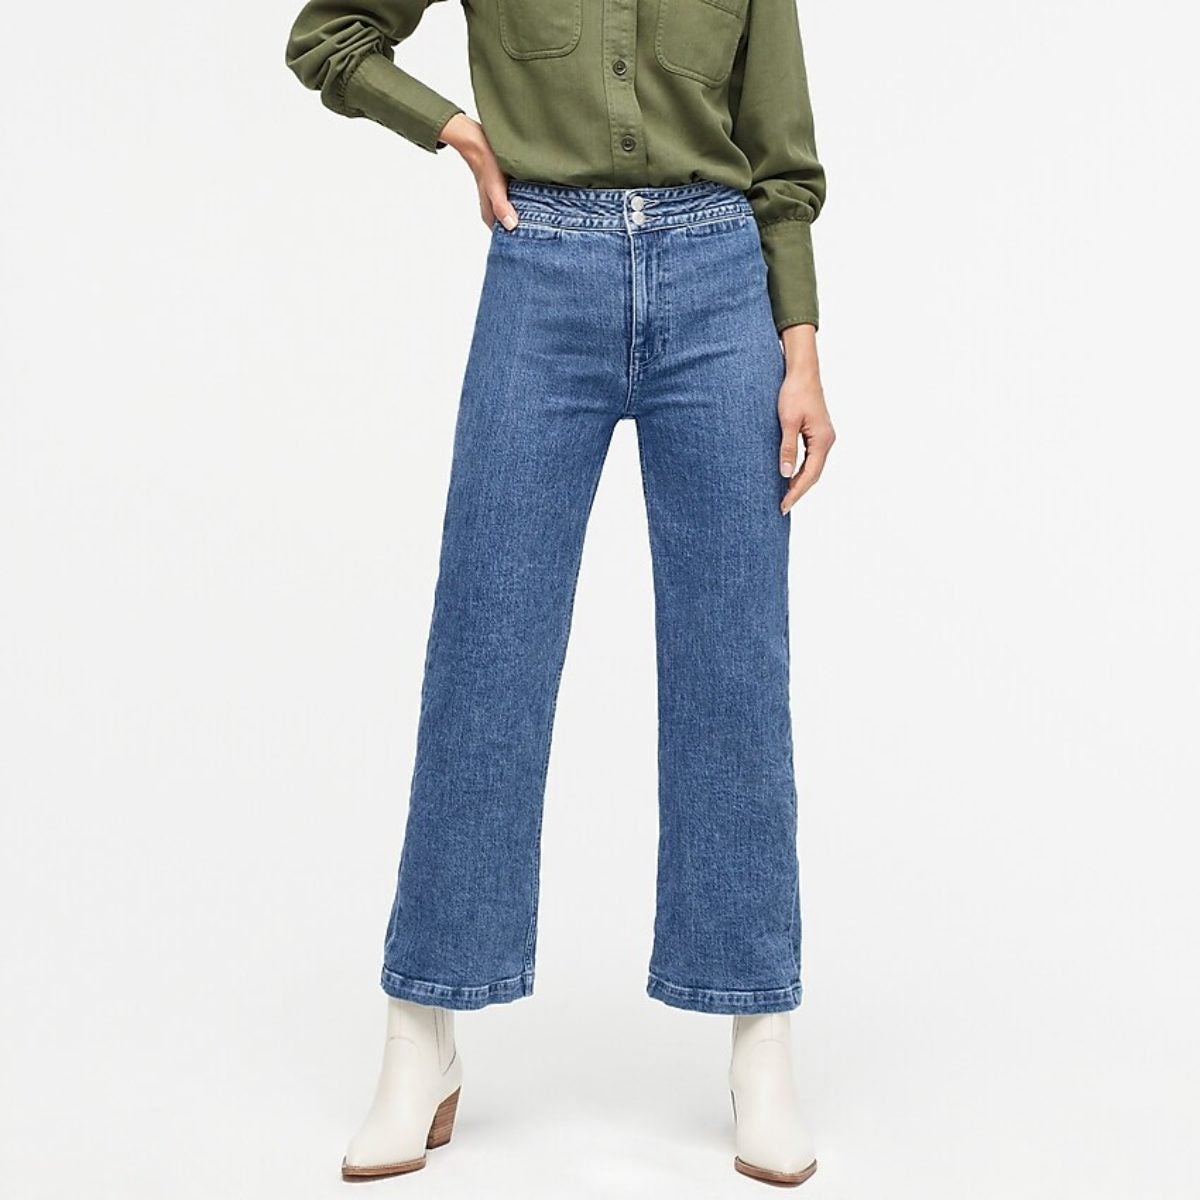 The Ultimate Fall Denim Guide For Petite Women - Essence